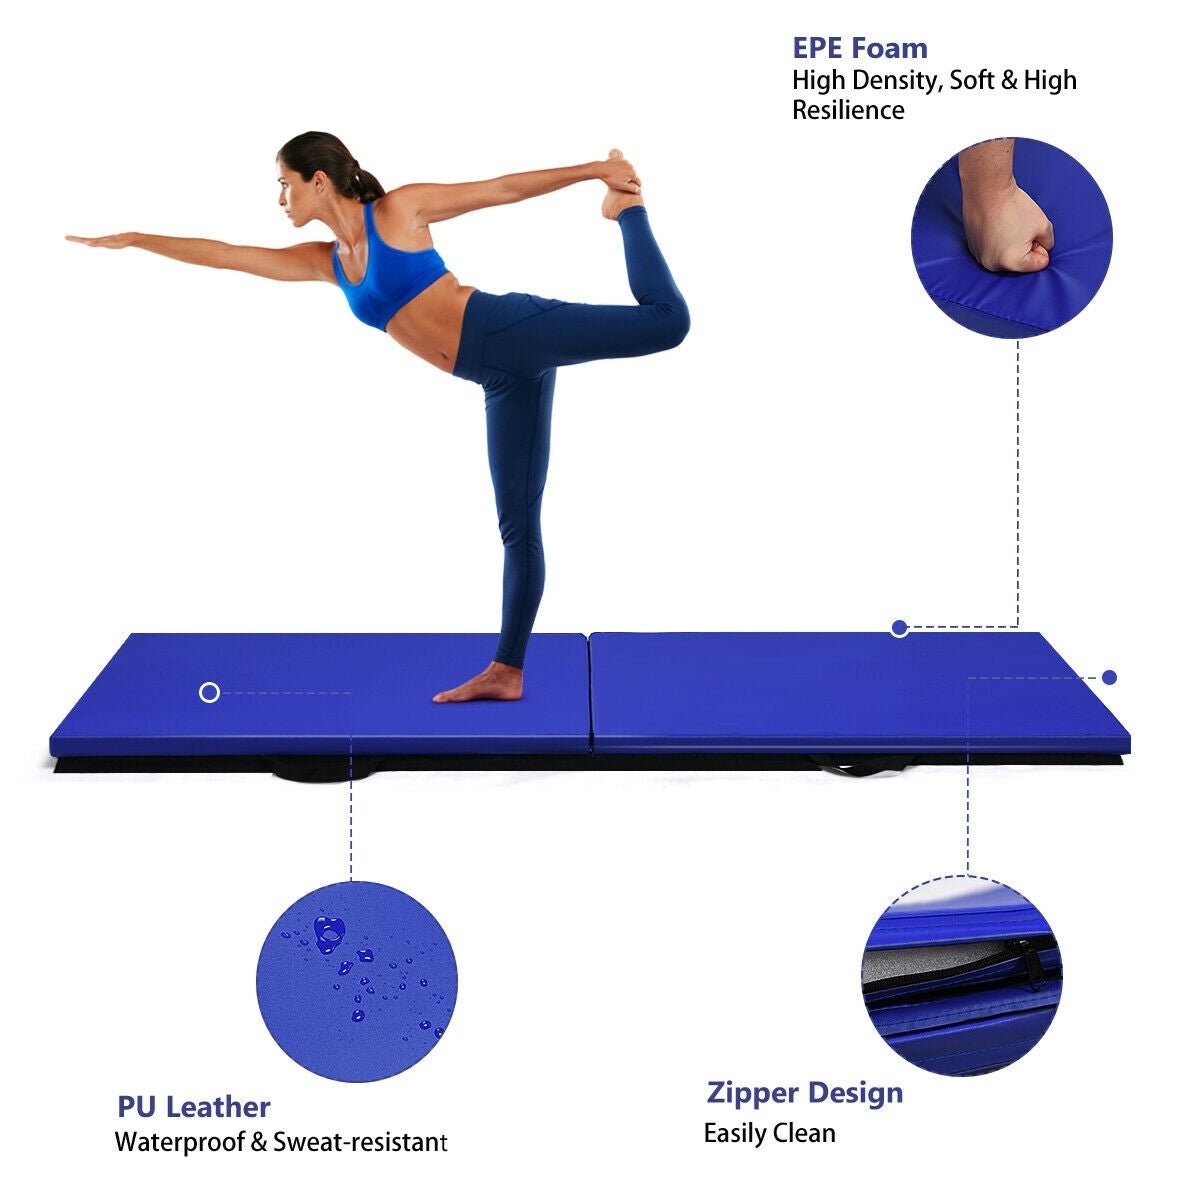 6 x 2 Feet Gymnastic Mat with Carrying Handles for Yoga